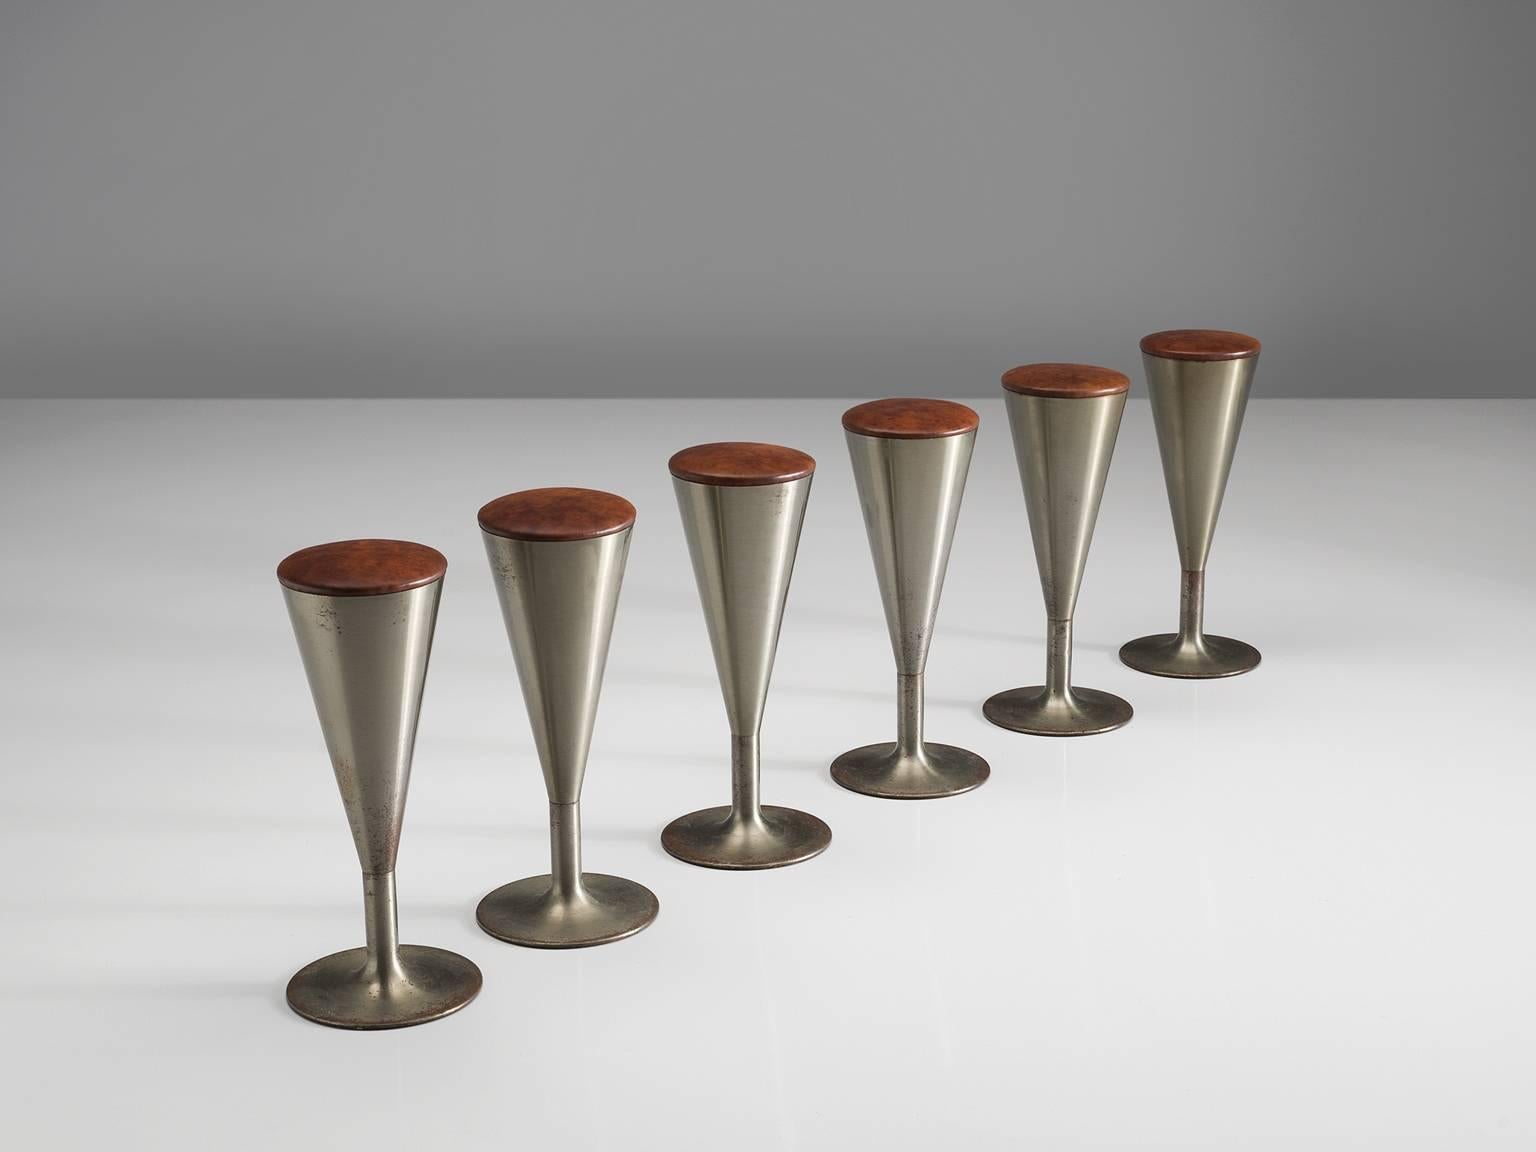 Leo Thafvelin for Johanson design, set of six bar stools, steel and leather, Sweden, 1960s.

This eccentric set of six bar stools is designed by the Swede Leo Thafvelin. They are
produced by Johanson design in Markaryd, Sweden. The stools are